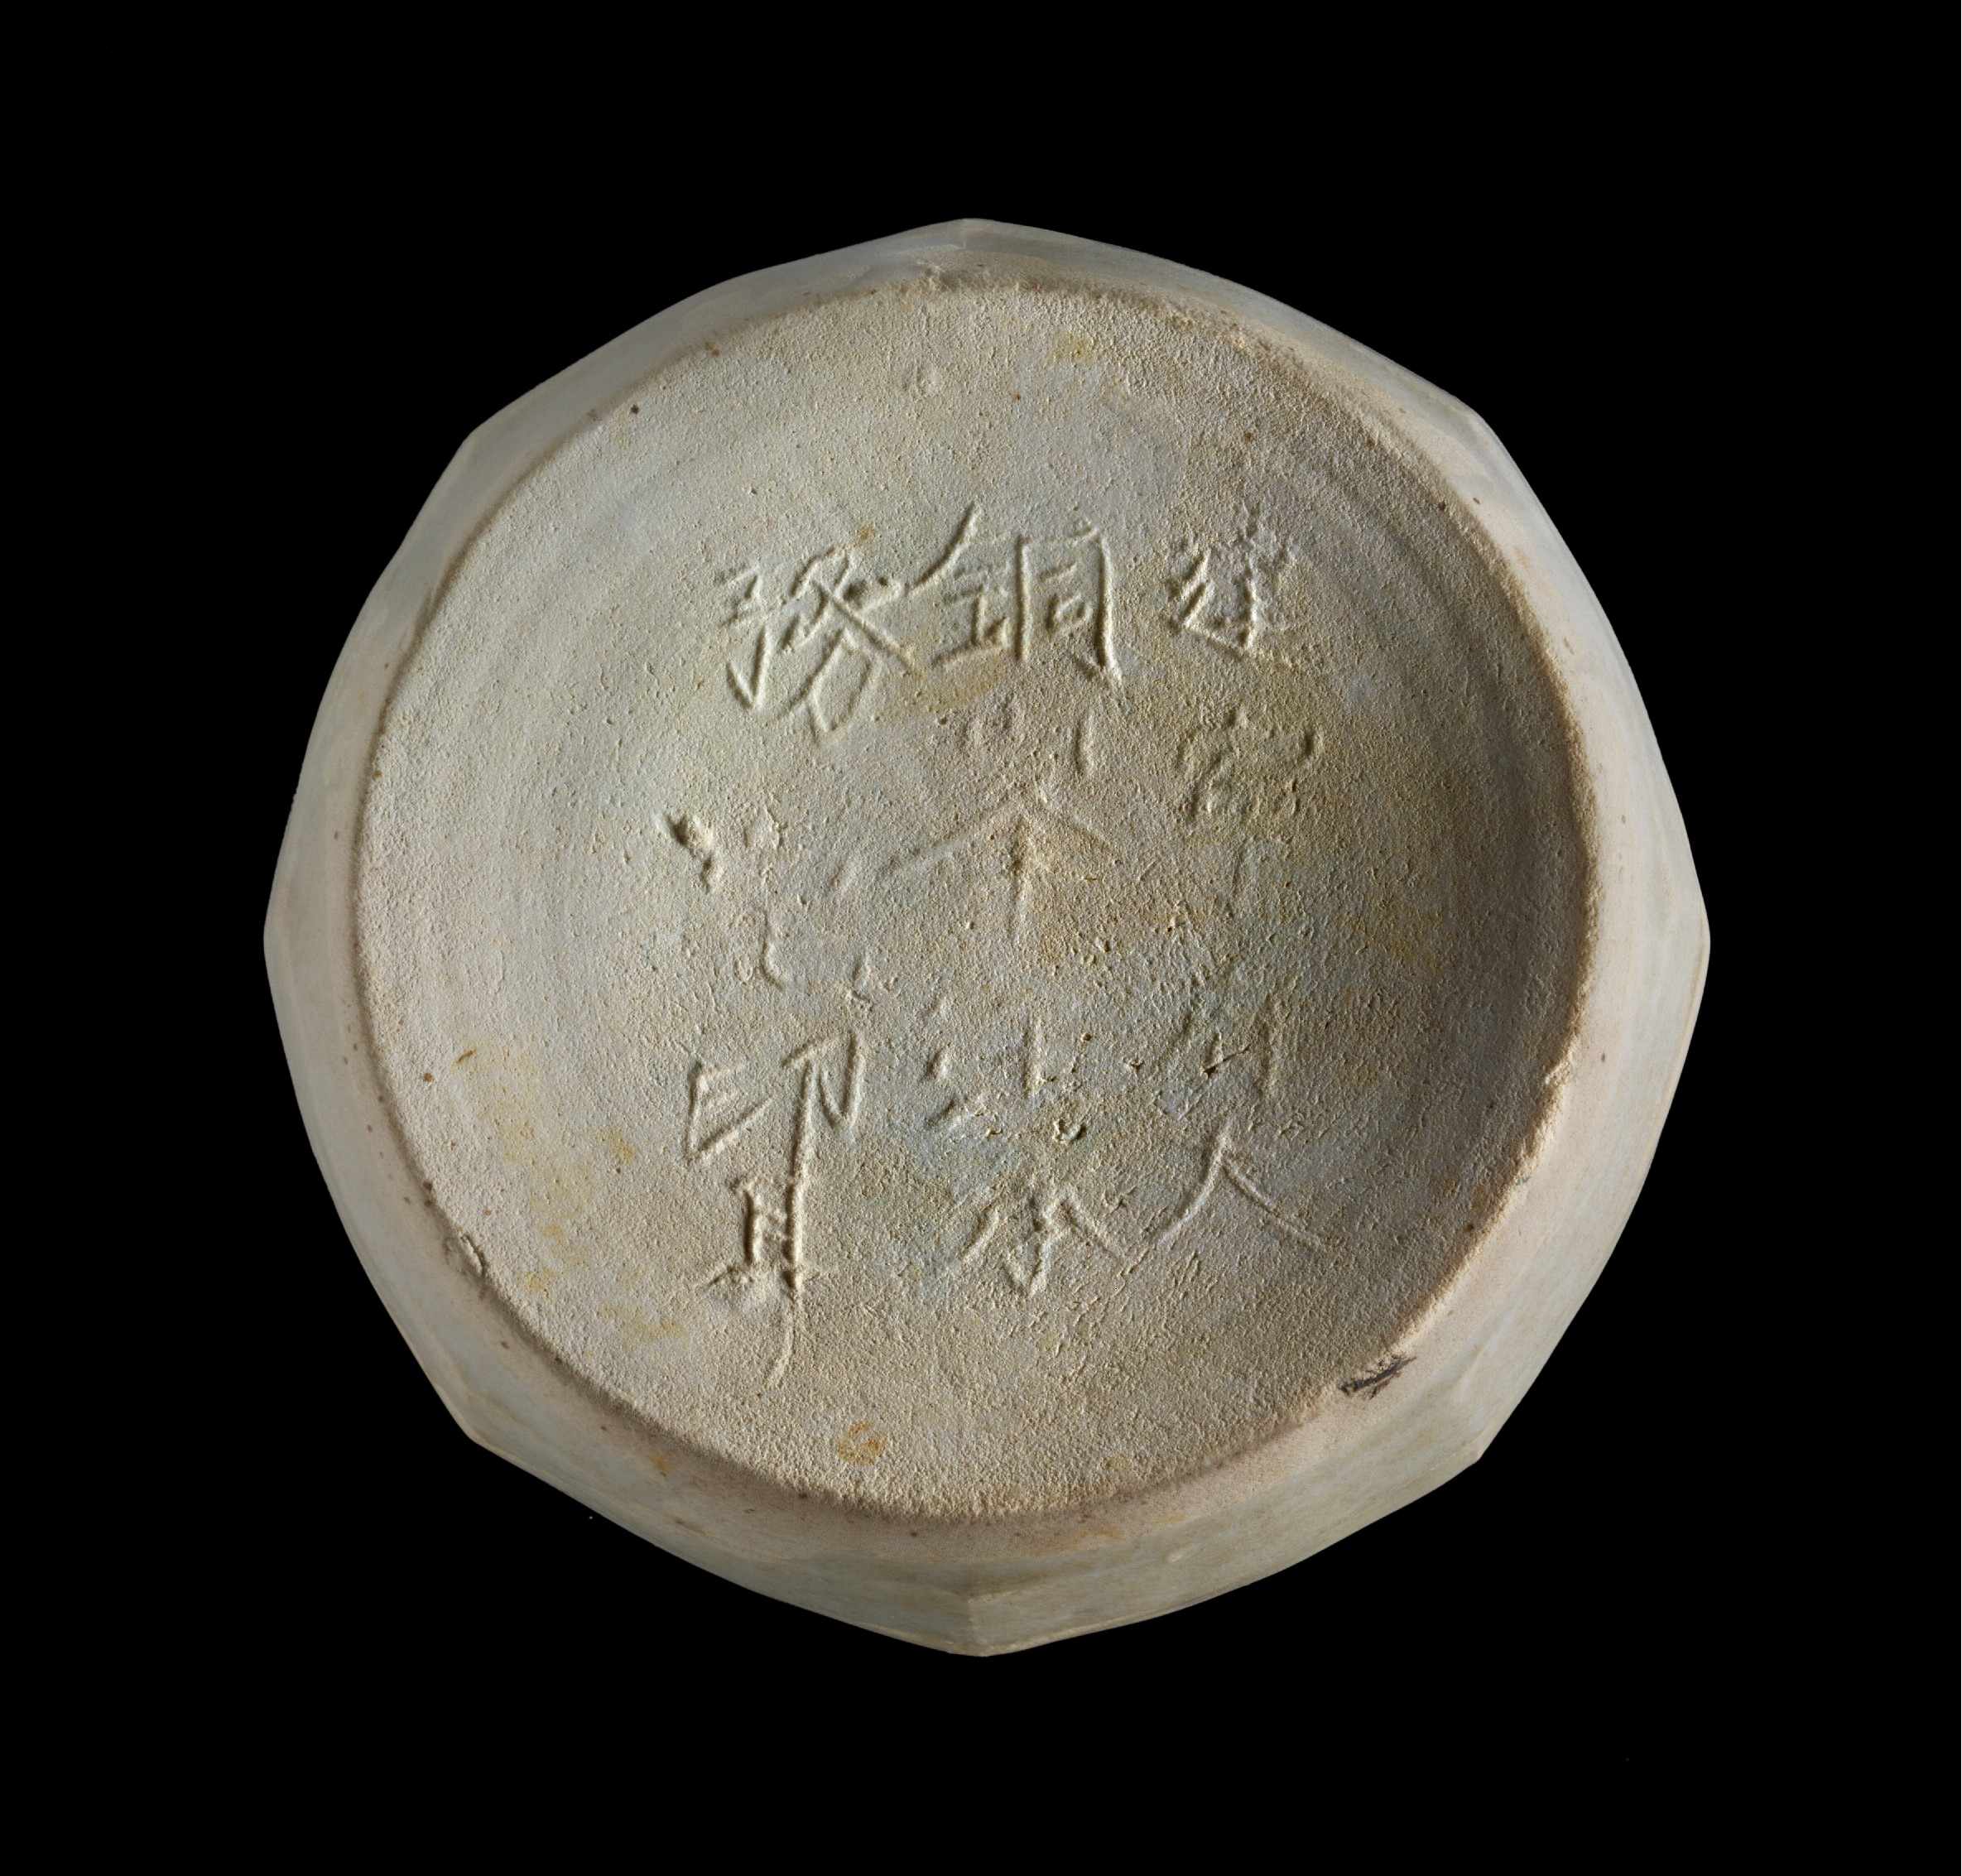 Ancient ‘made in China’ label pushes back the date of shipwreck by 100 years